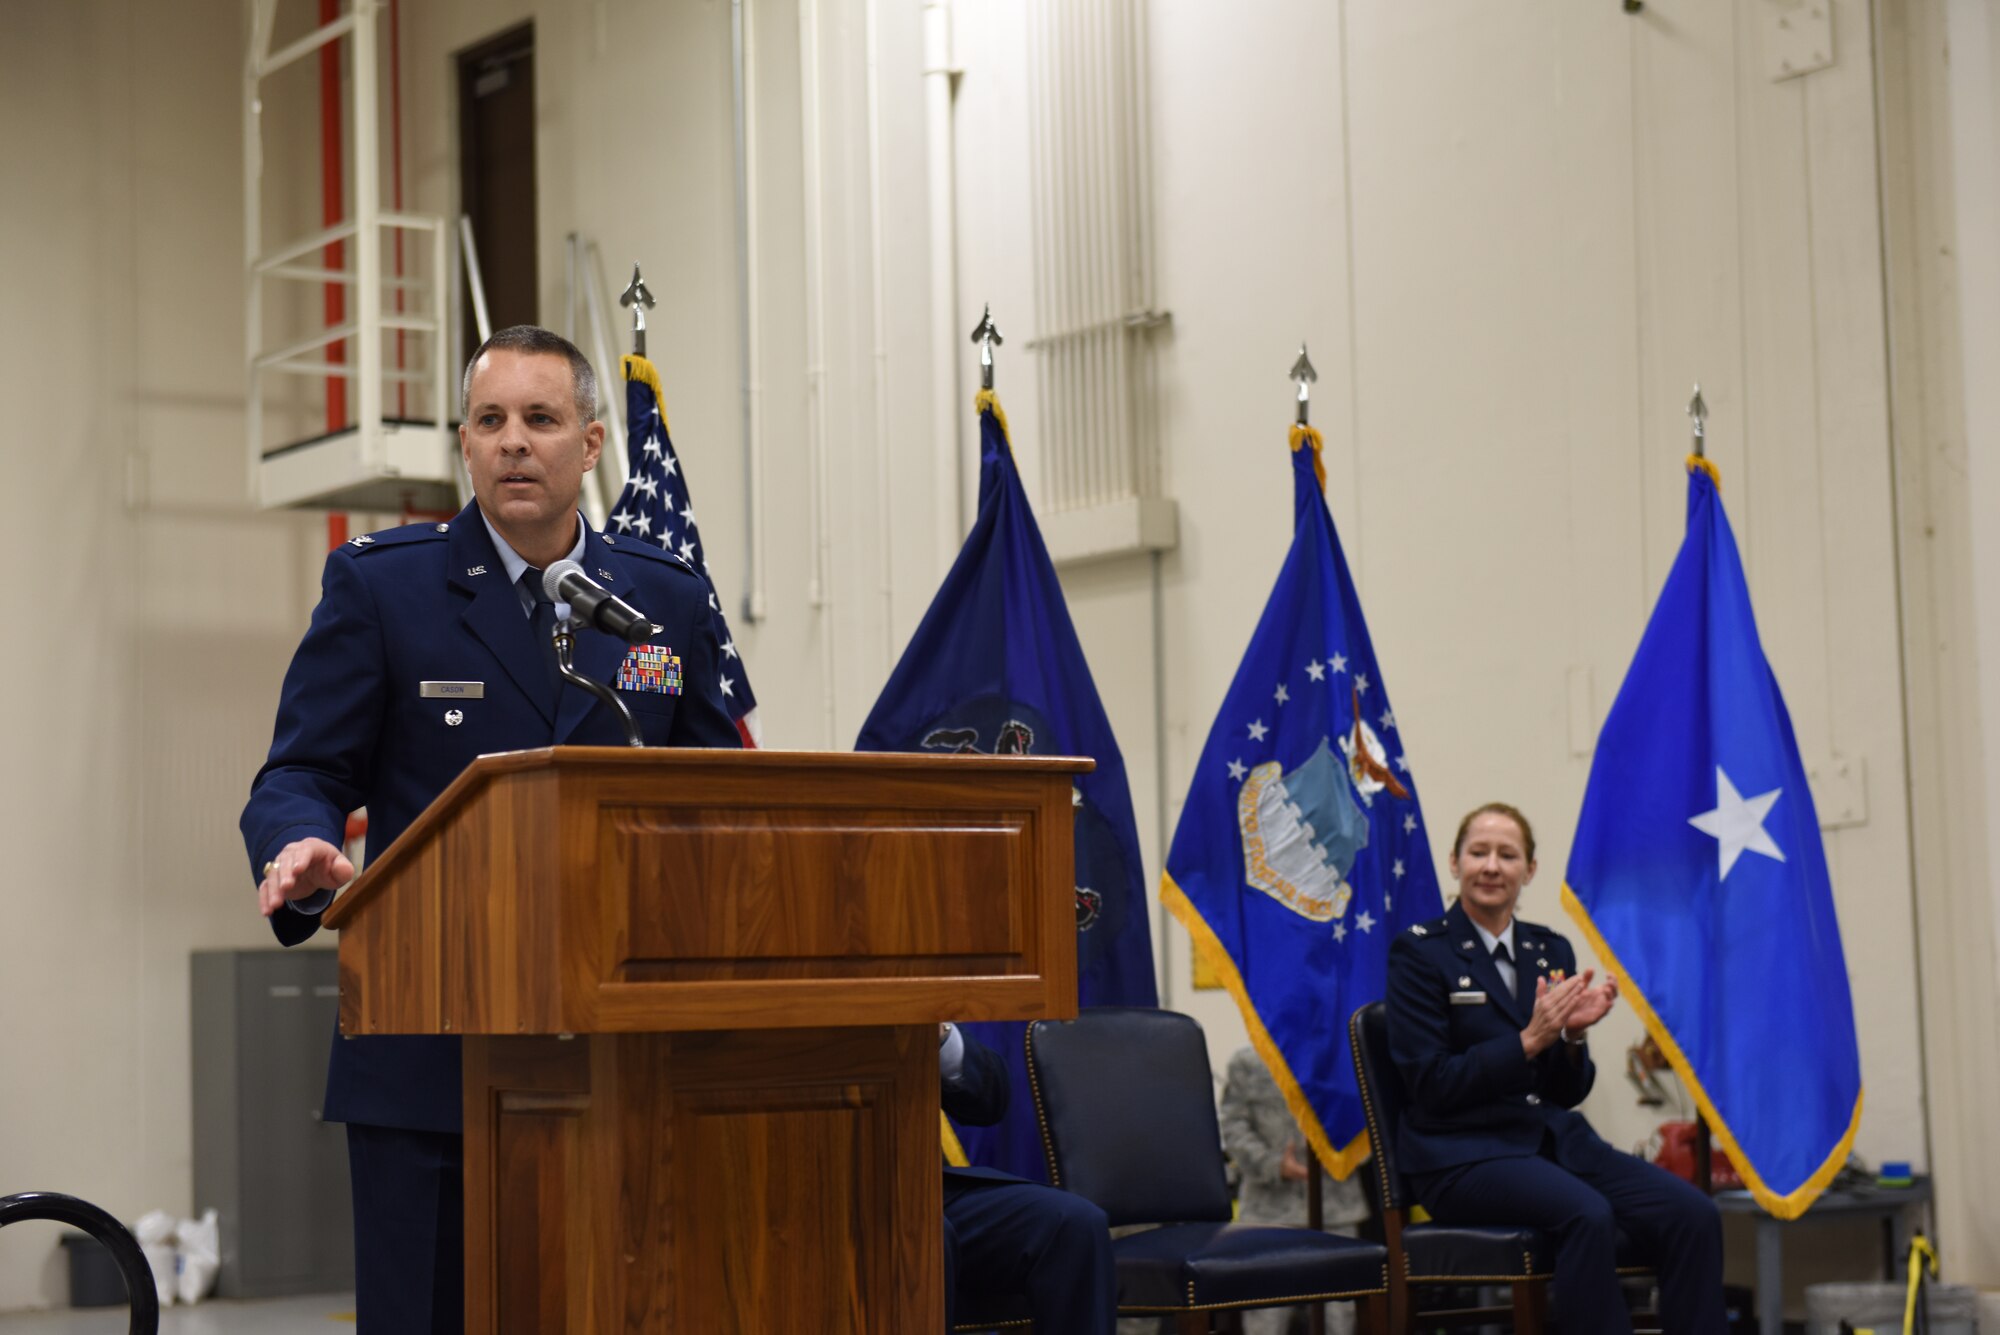 Col. Benjamin (Mike) Cason addresses the Airmen of the 193rd Special Operations Wing during a change-of-command ceremony on base Nov. 14 where he took charge of the wing. Cason is the first dual-status Airman to assume command of an Air Force Special Operations Command unit. (U.S. Air National Guard photo by Senior Airman Ethan Carl/Released)